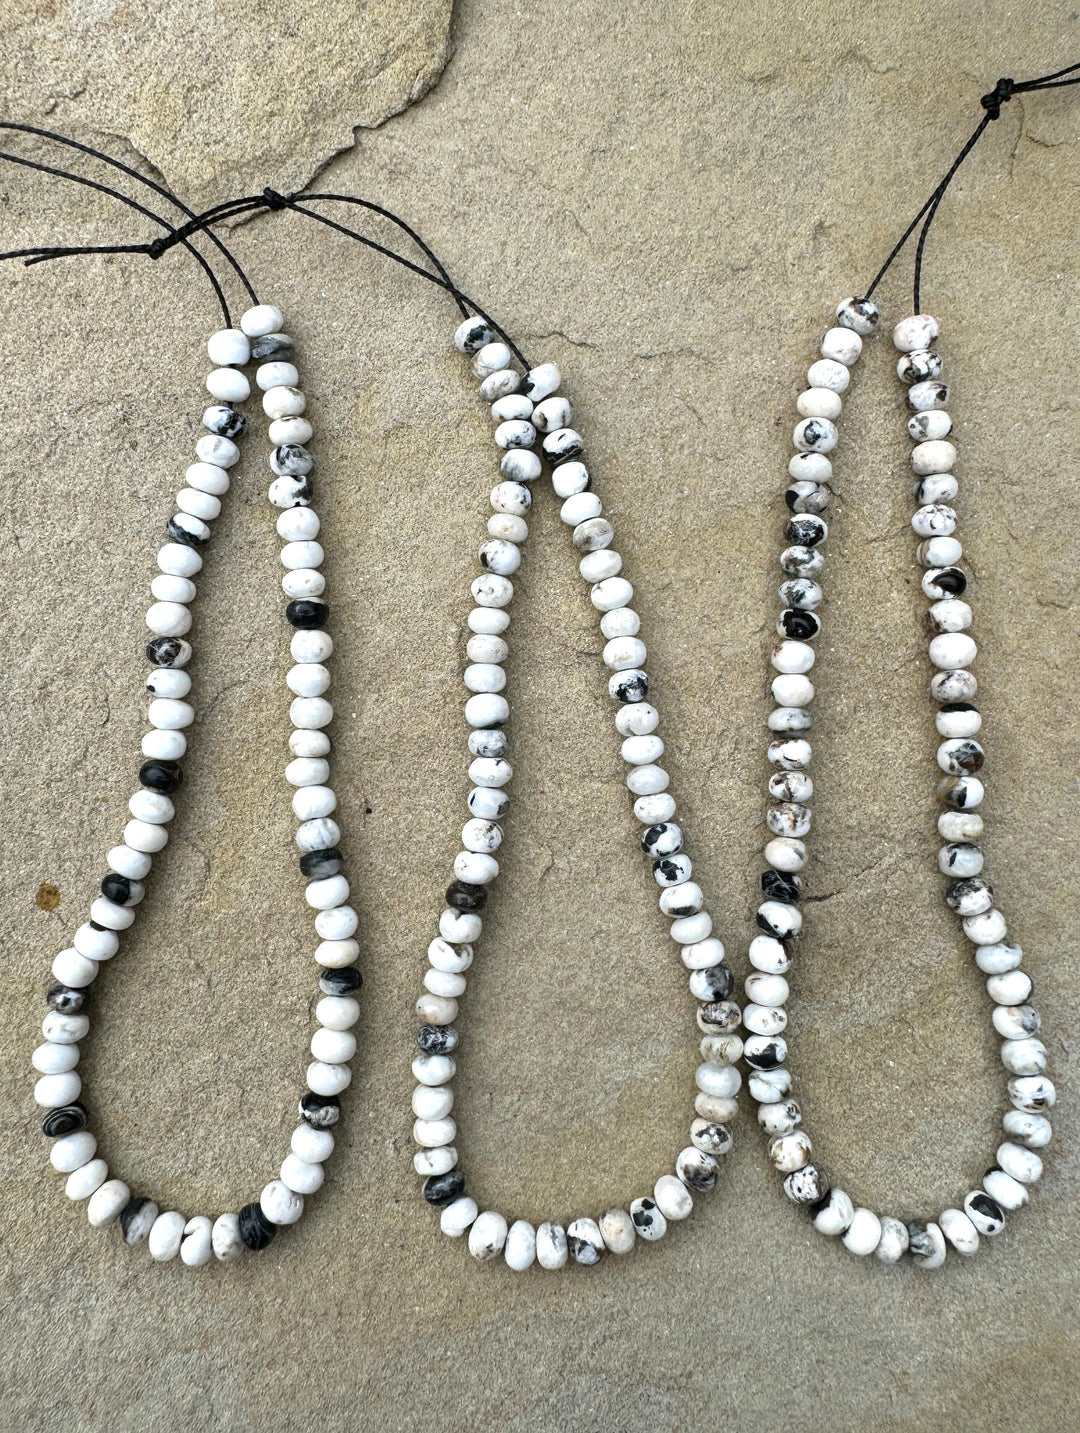 RARE High Quality White Buffalo 5mm Rondell Beads (9 inch